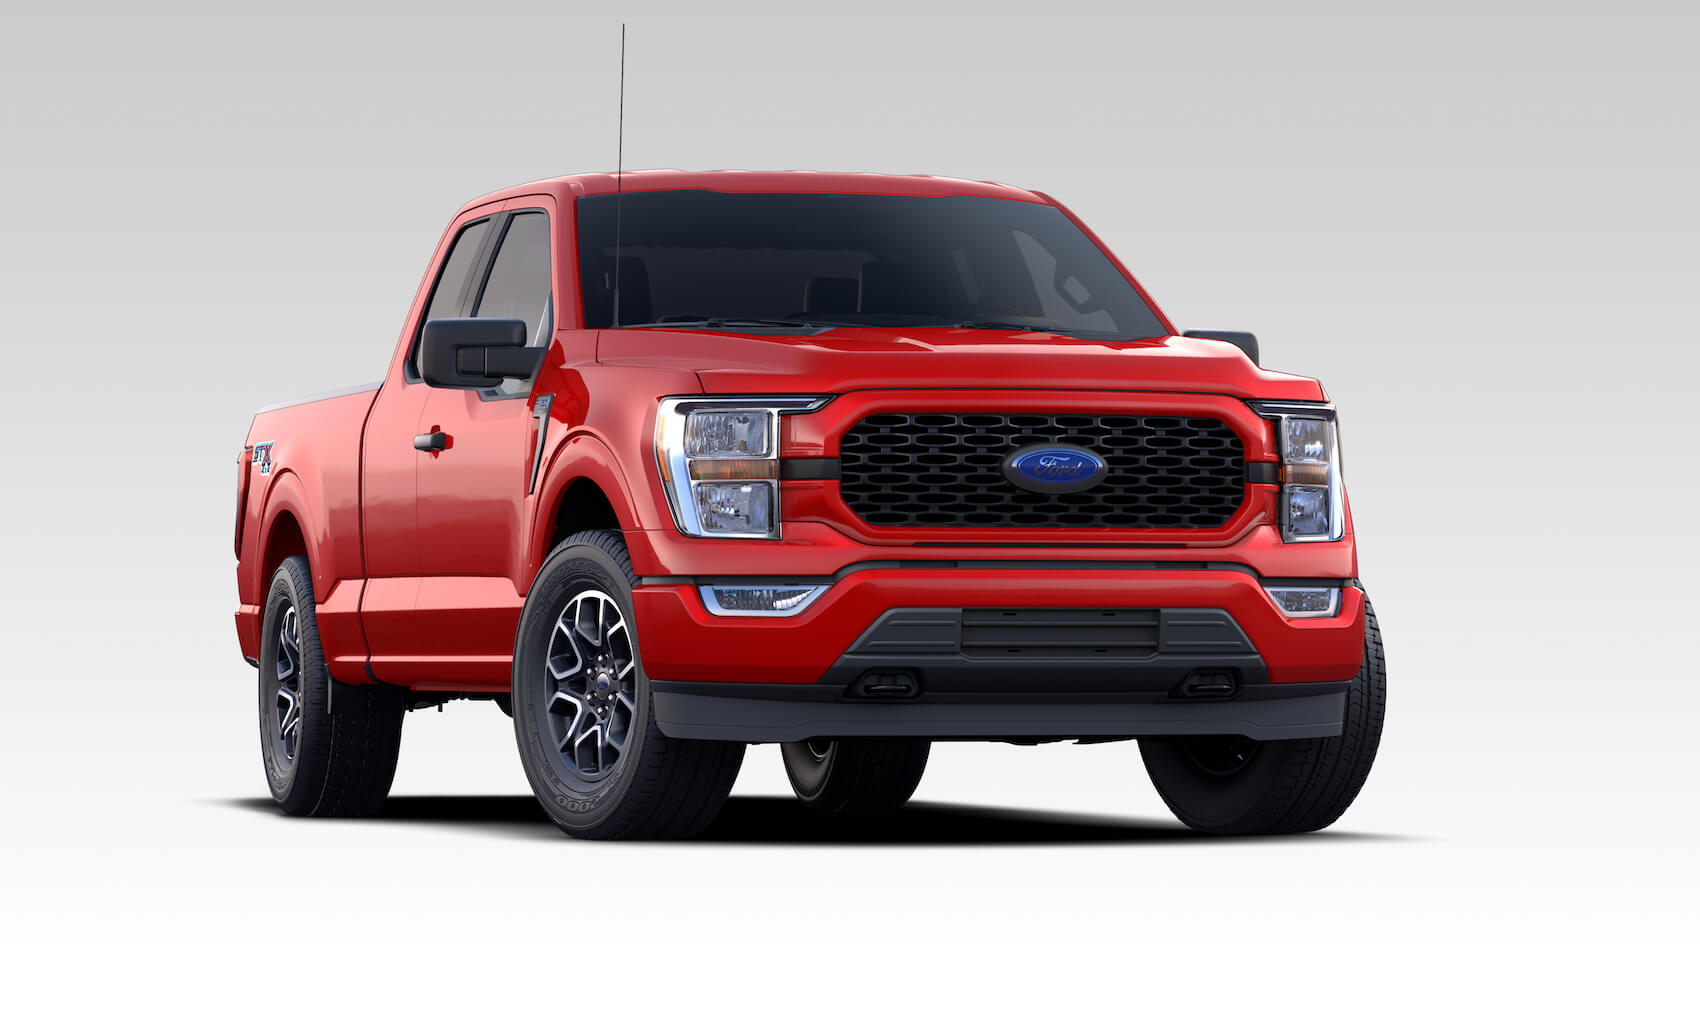 2021 Ford F-150 facts and features